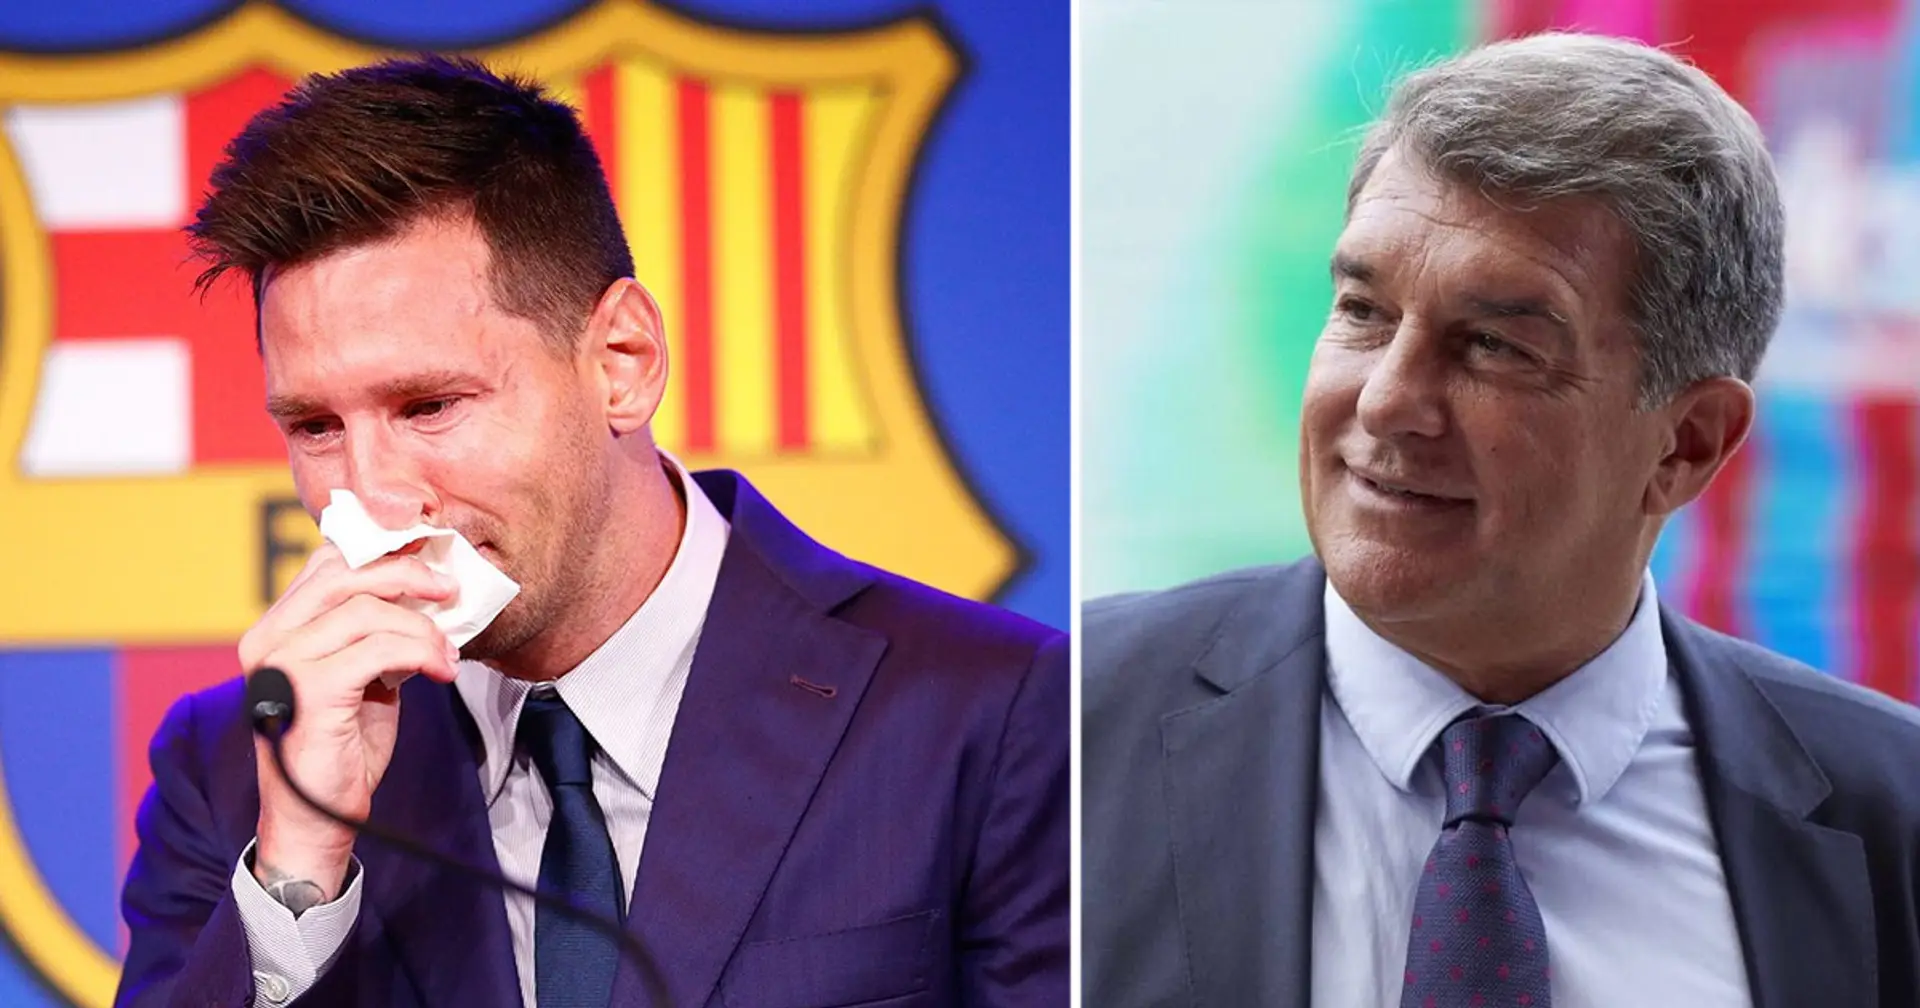 Barca 'close' to agreeing CVC deal after rejecting it and losing Messi last summer